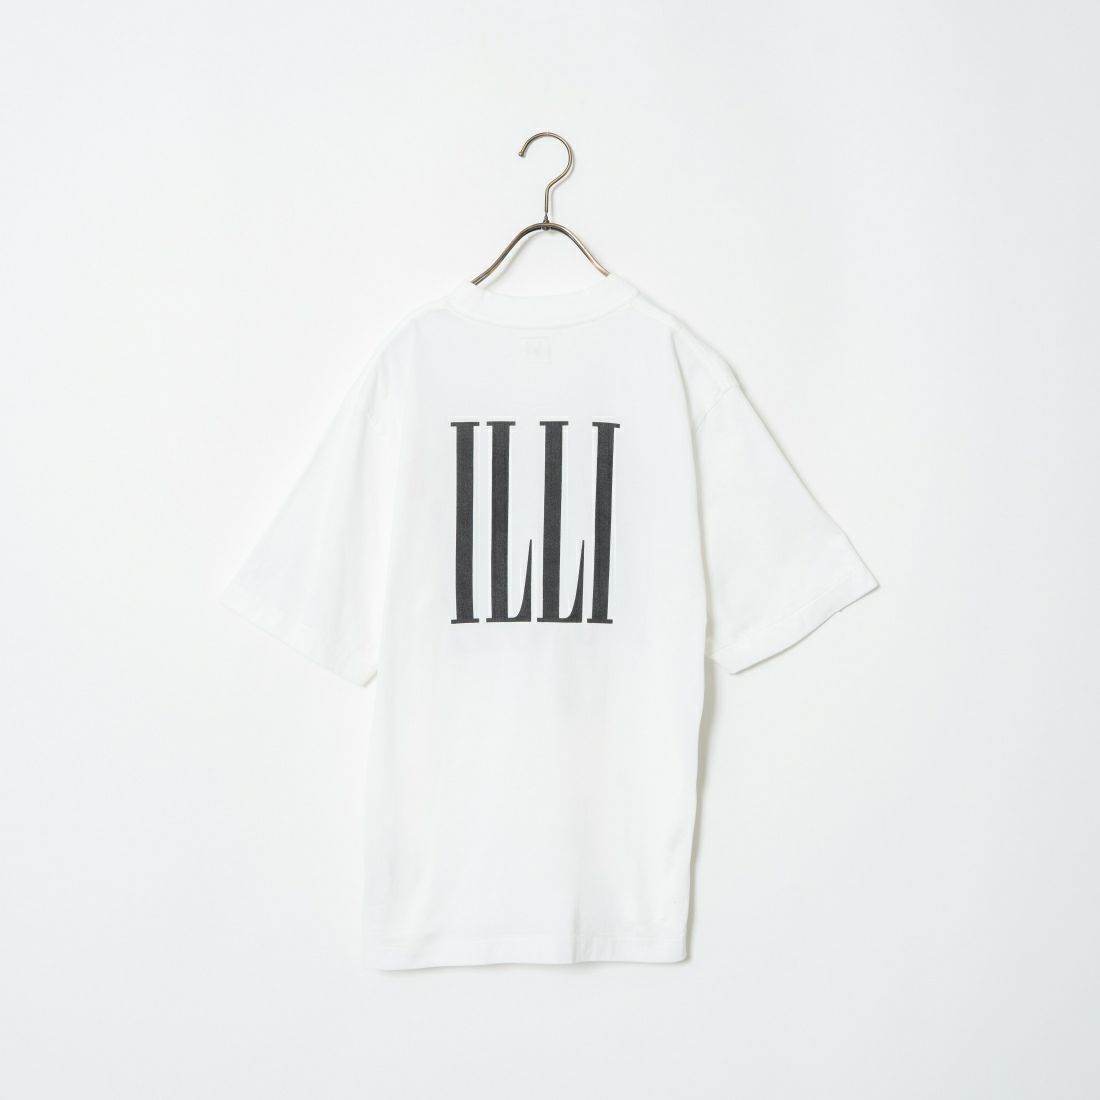 blurhms ROOTSTOCK [ブラームス ルーツストック] スタンダードプリントTシャツ [BROOTS24S33B] 01 WHITE